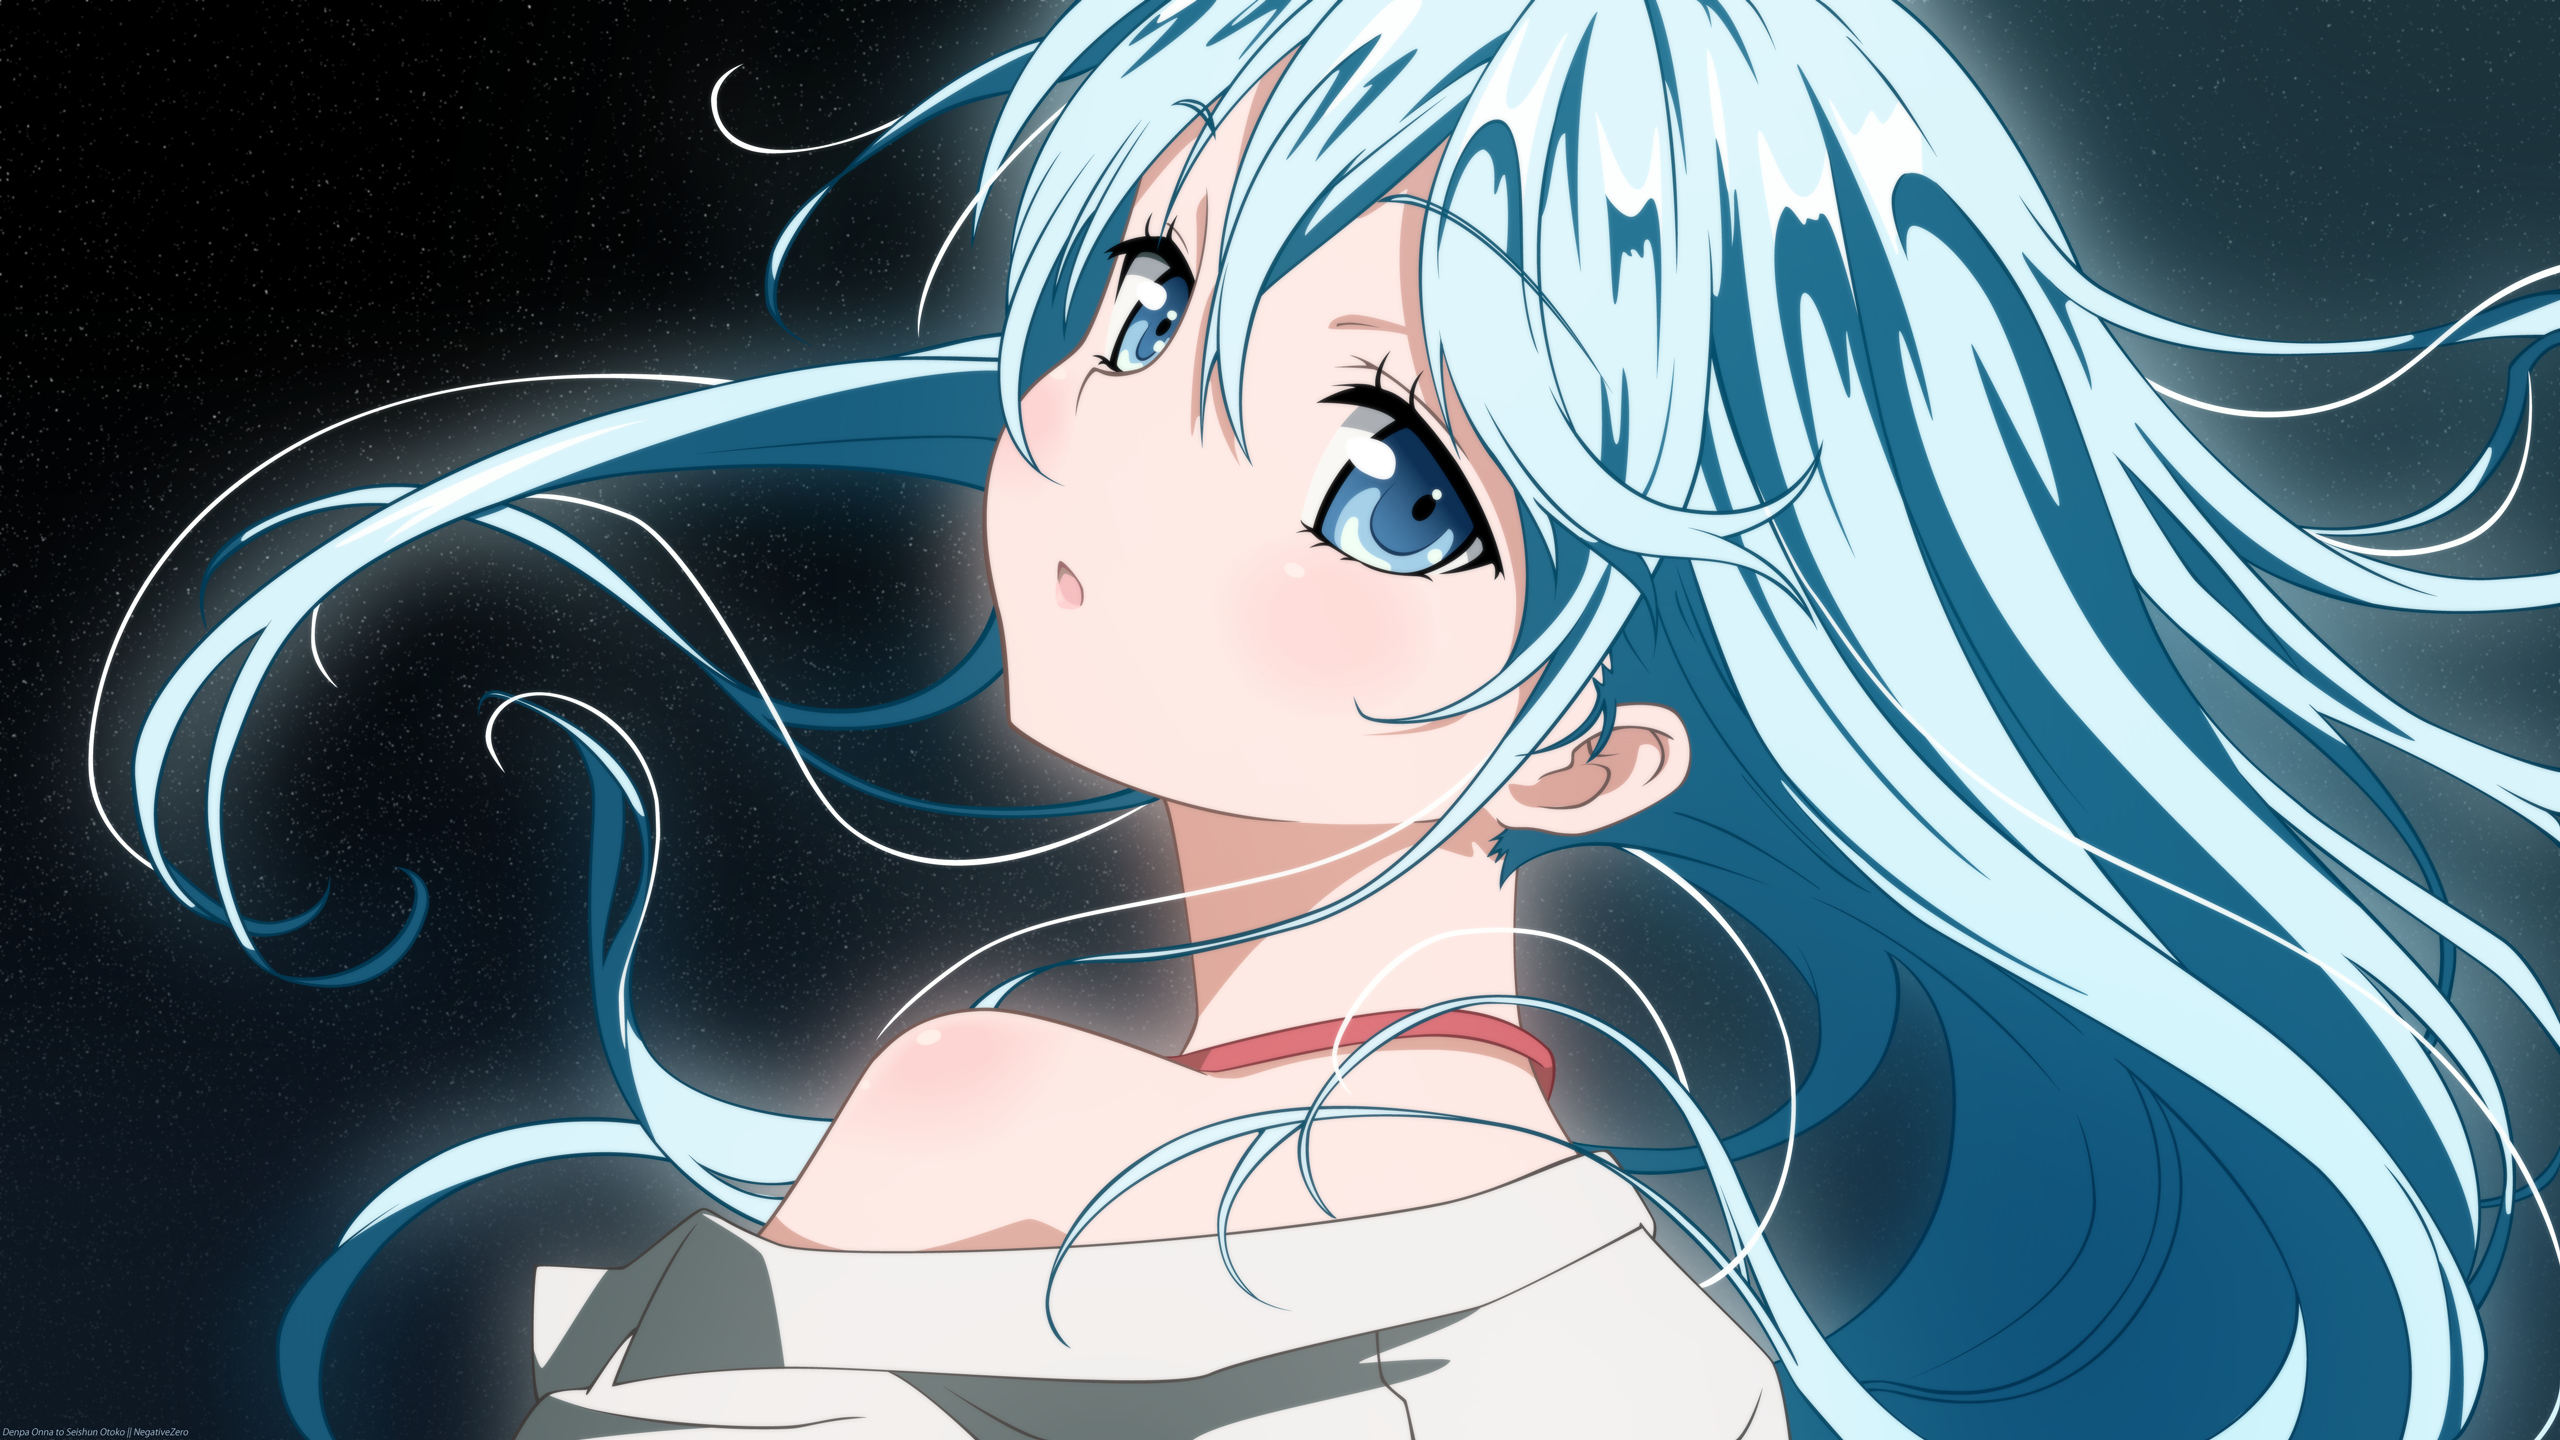 Anime Girl with Blue Eyes and Hair